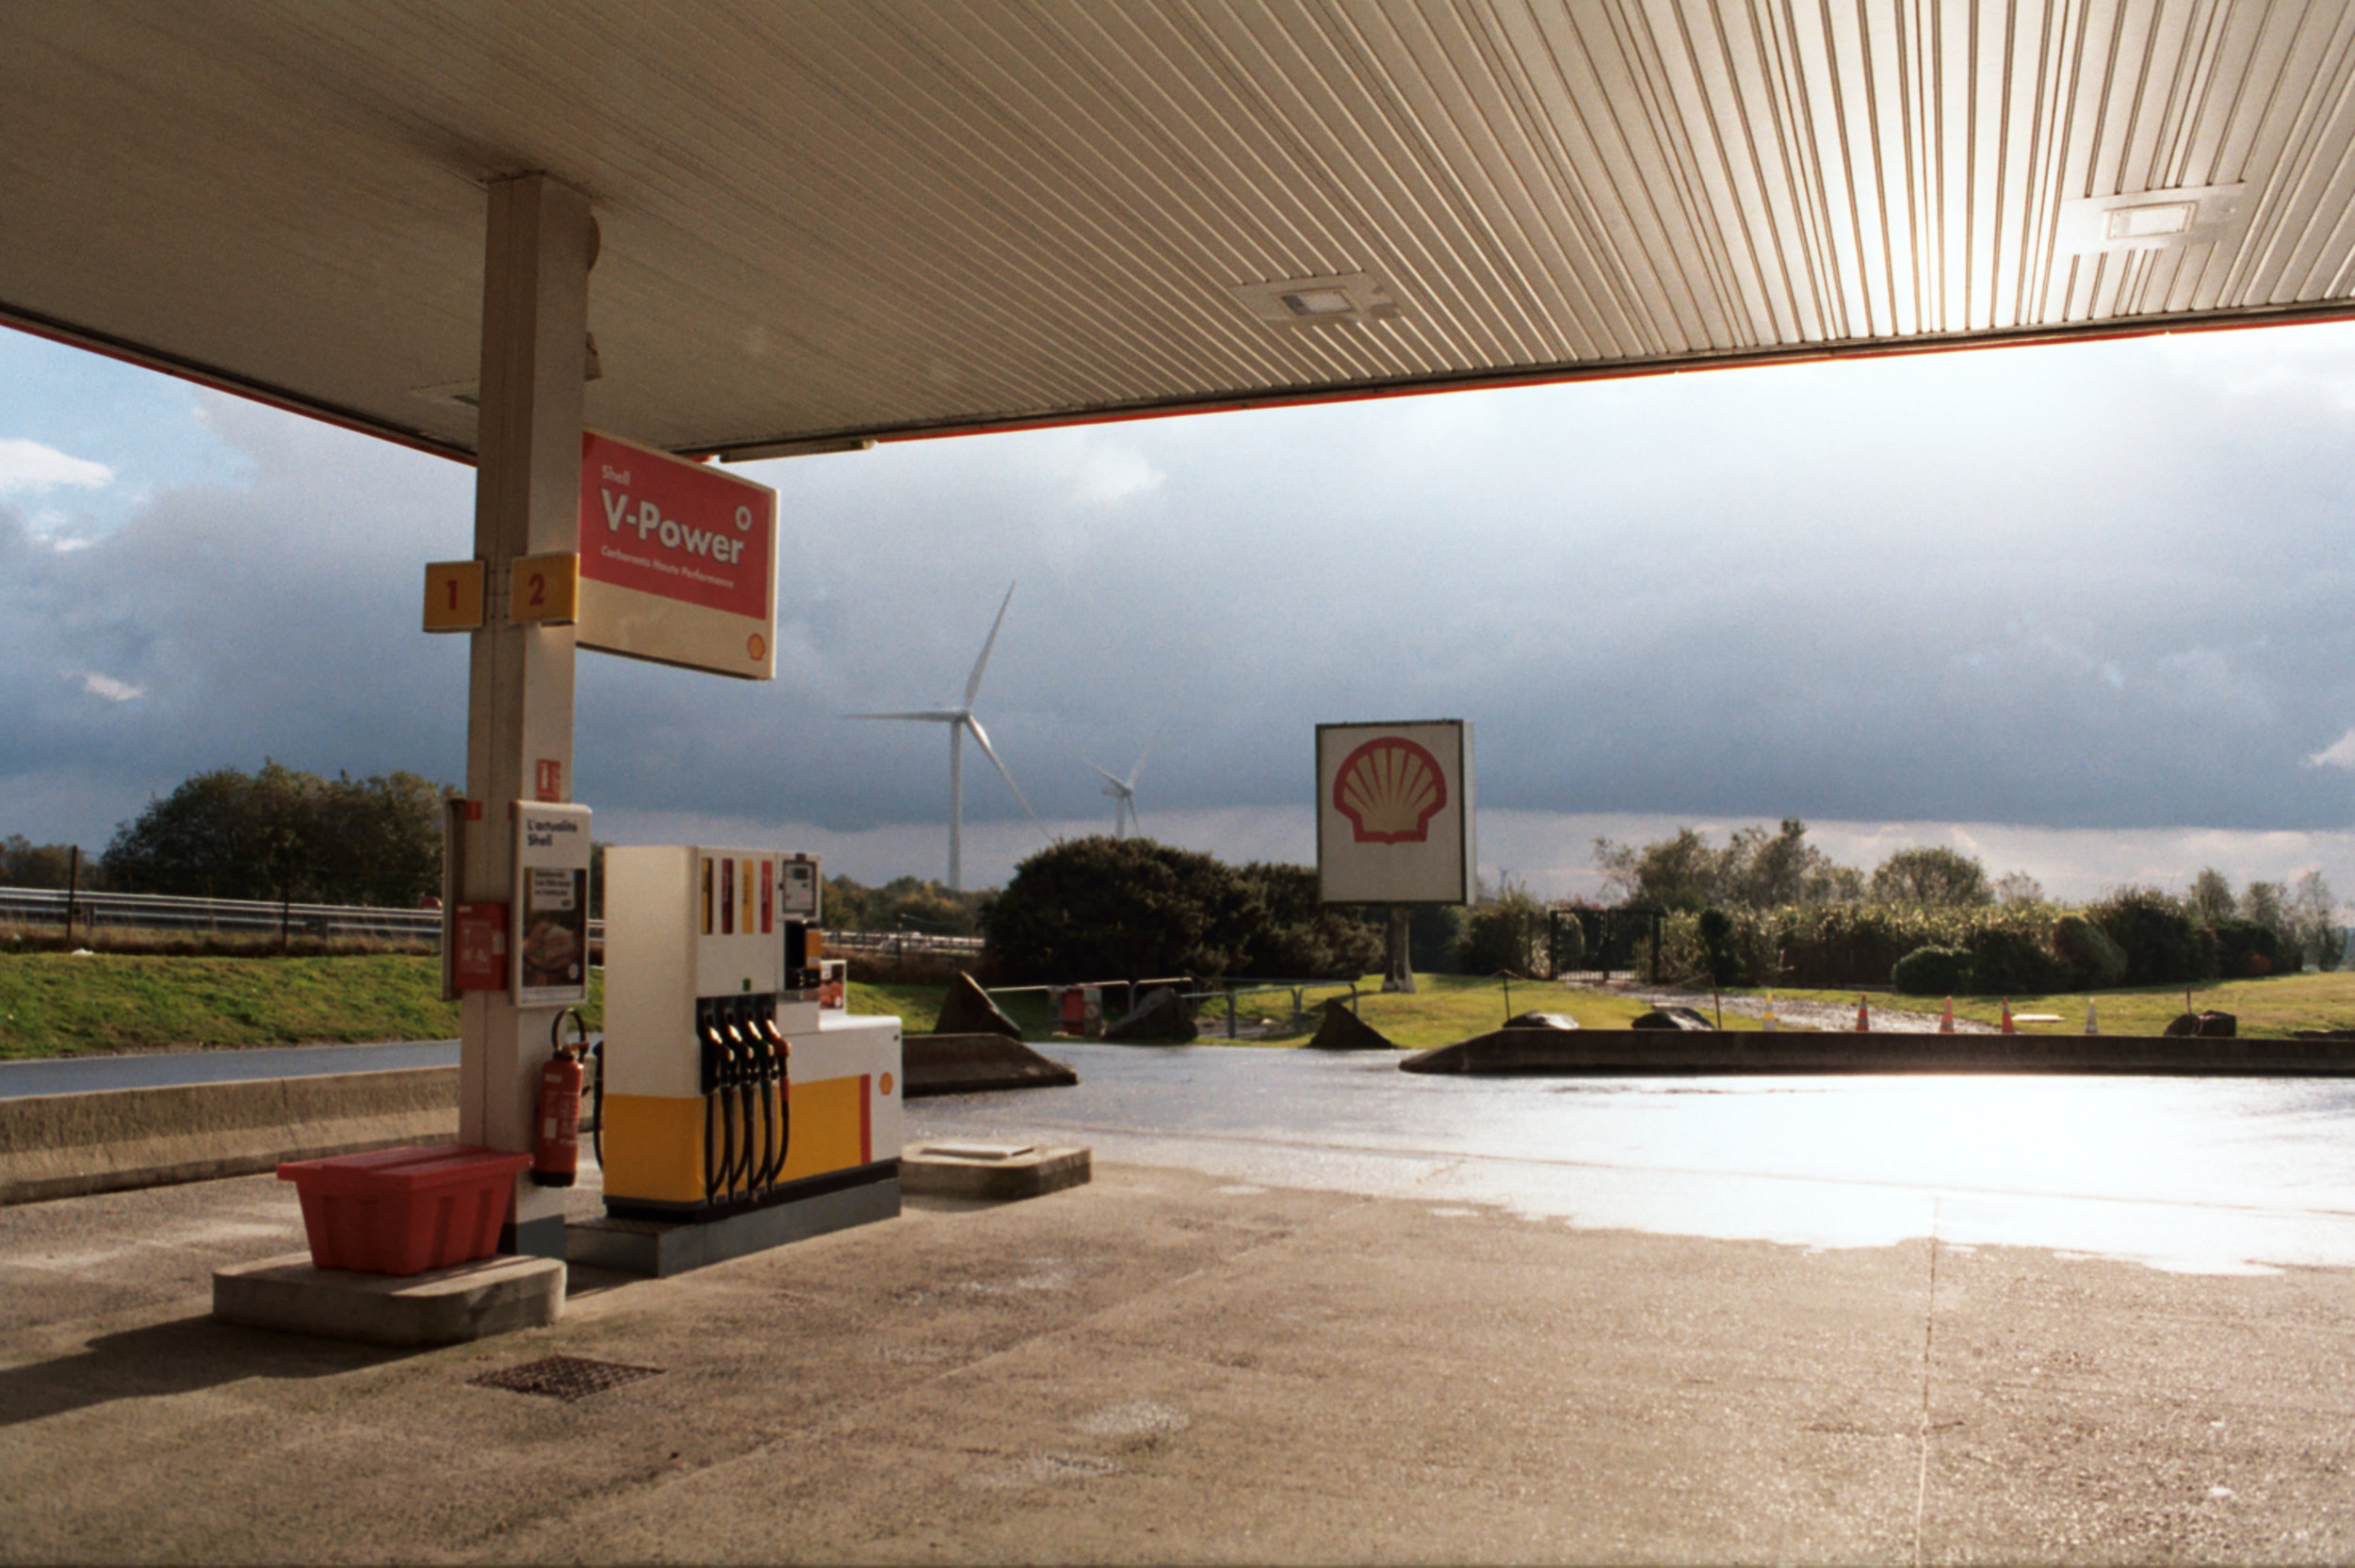 Gas station, Spain